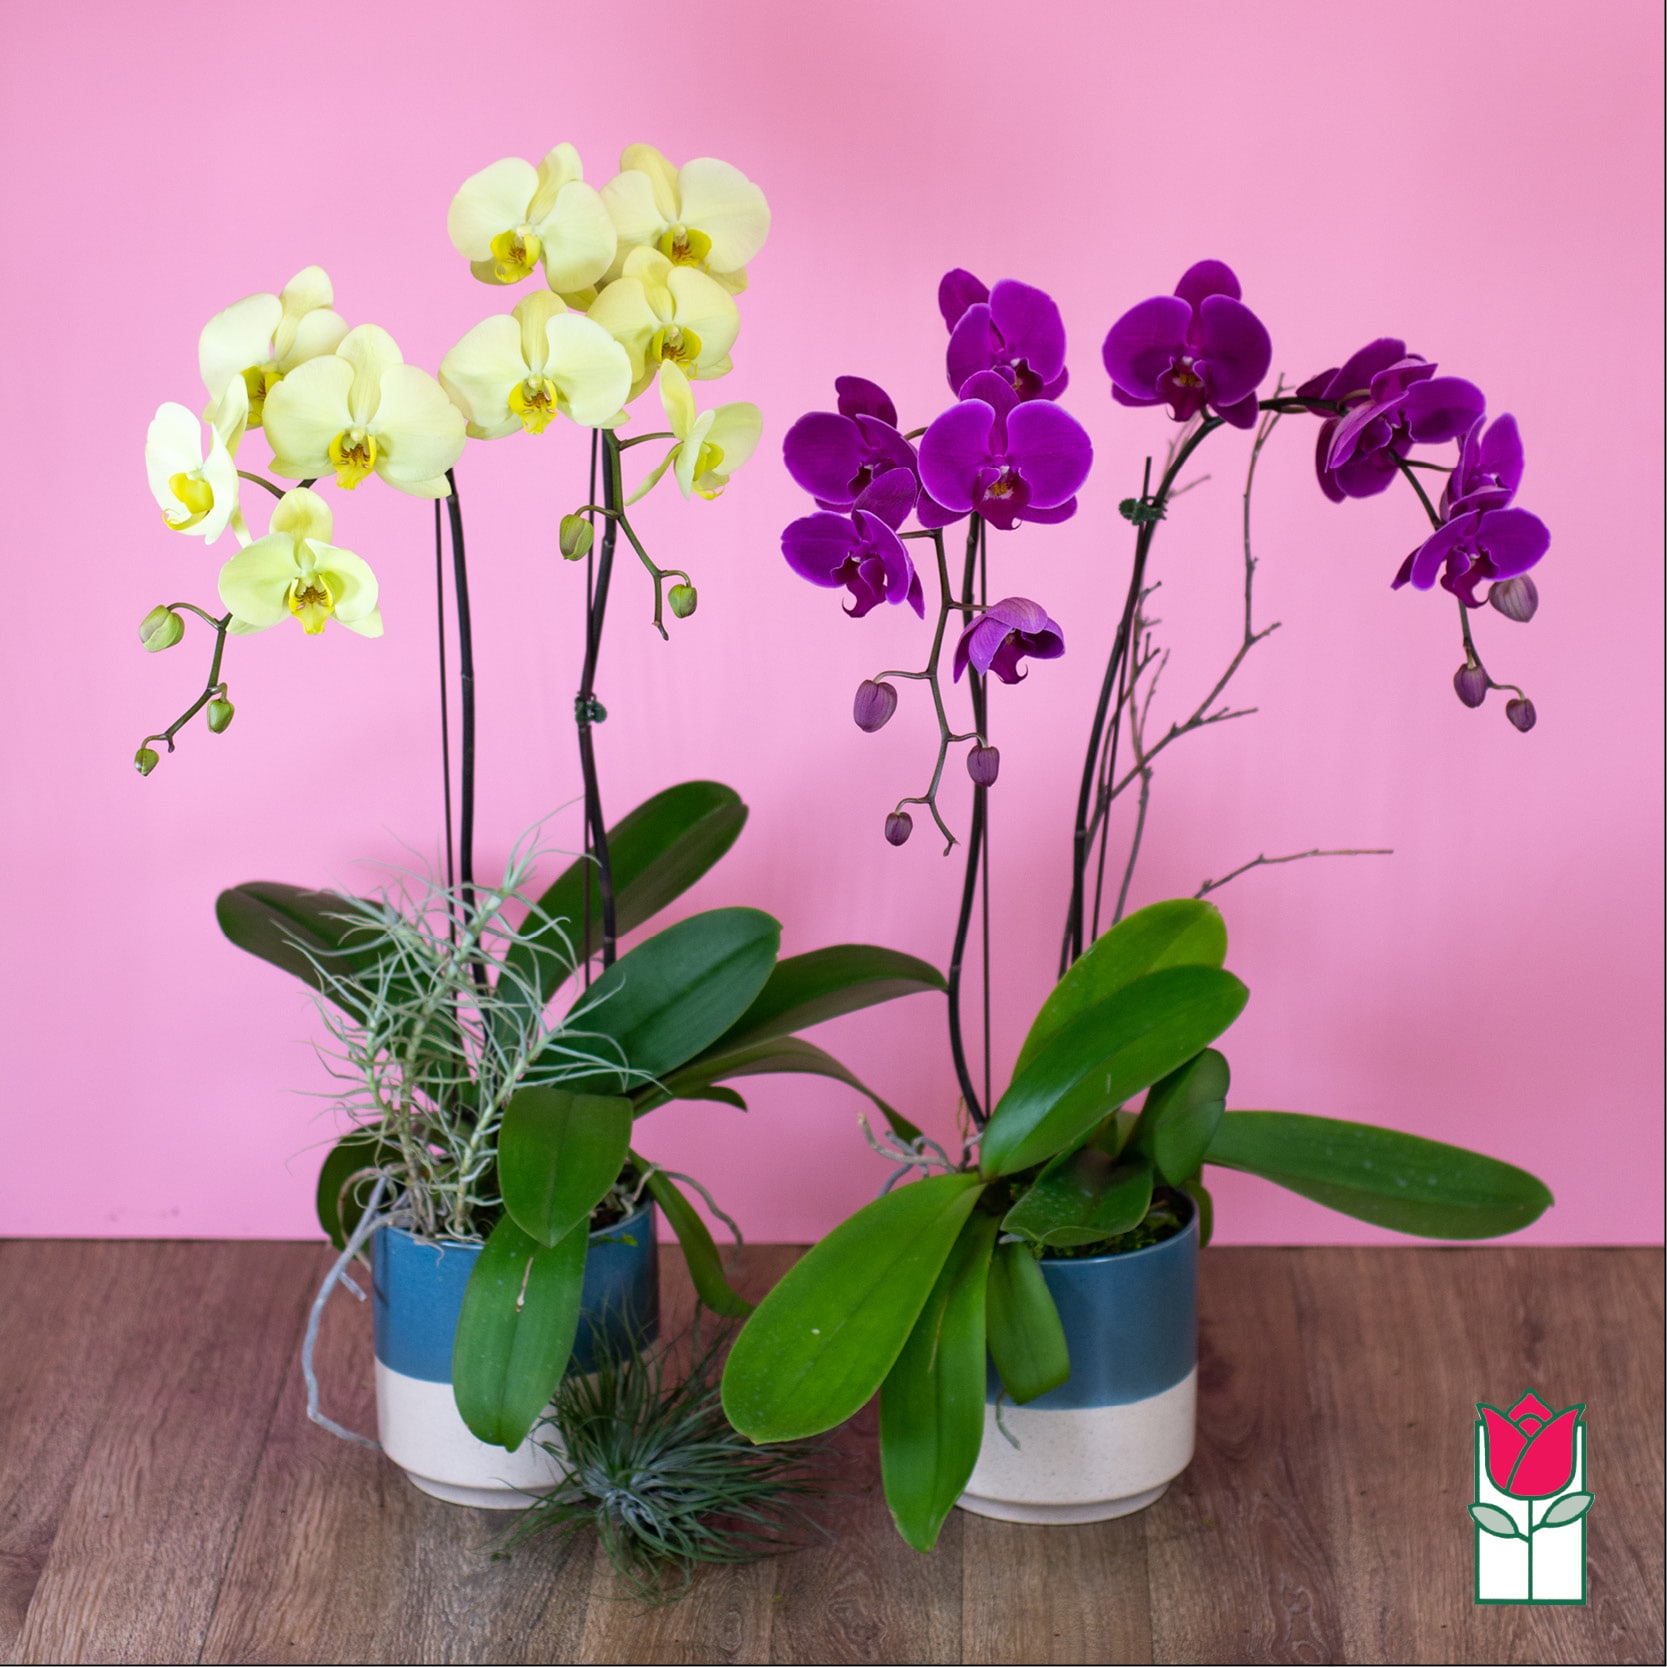 2 Stem - Phalaenopsis Orchid Plant (Seasonal Color Varies) - The Beretania Florist Phalaenopsis Orchid Plant is the perfect gift for those who appreciate the beauty and elegance of living plants. This stunning orchid plant is expertly designed in a premium ceramic container, which is carefully selected to complement the beauty of the orchid.  The color of the orchid will vary depending on the season, but rest assured that each one is carefully chosen for its beauty and quality. Whether it's a classic white, a vibrant pink, or a stunning purple, each orchid is sure to impress and delight.  Customers have the option to choose and upgrade the amount of flower stems included in the gift, from 1 - 5 stems or more with a special phone order. This allows for a customized and personalized gift that perfectly suits the occasion and the recipient's preferences.  The Beretania Florist Phalaenopsis Orchid Plant is available for delivery in the Honolulu area, making it easy and convenient to send a beautiful and thoughtful gift to a loved one or friend. Our expert florists will ensure that each plant is carefully prepared and delivered with care, ensuring that it arrives in pristine condition.  Give the gift of natural beauty and elegance with the Beretania Florist Phalaenopsis Orchid Plant. Perfect for any occasion, this premium living plant is sure to bring joy and happiness to the recipient for months to come. Order now and experience the beauty and quality of our expertly designed floral arrangements and living plants.